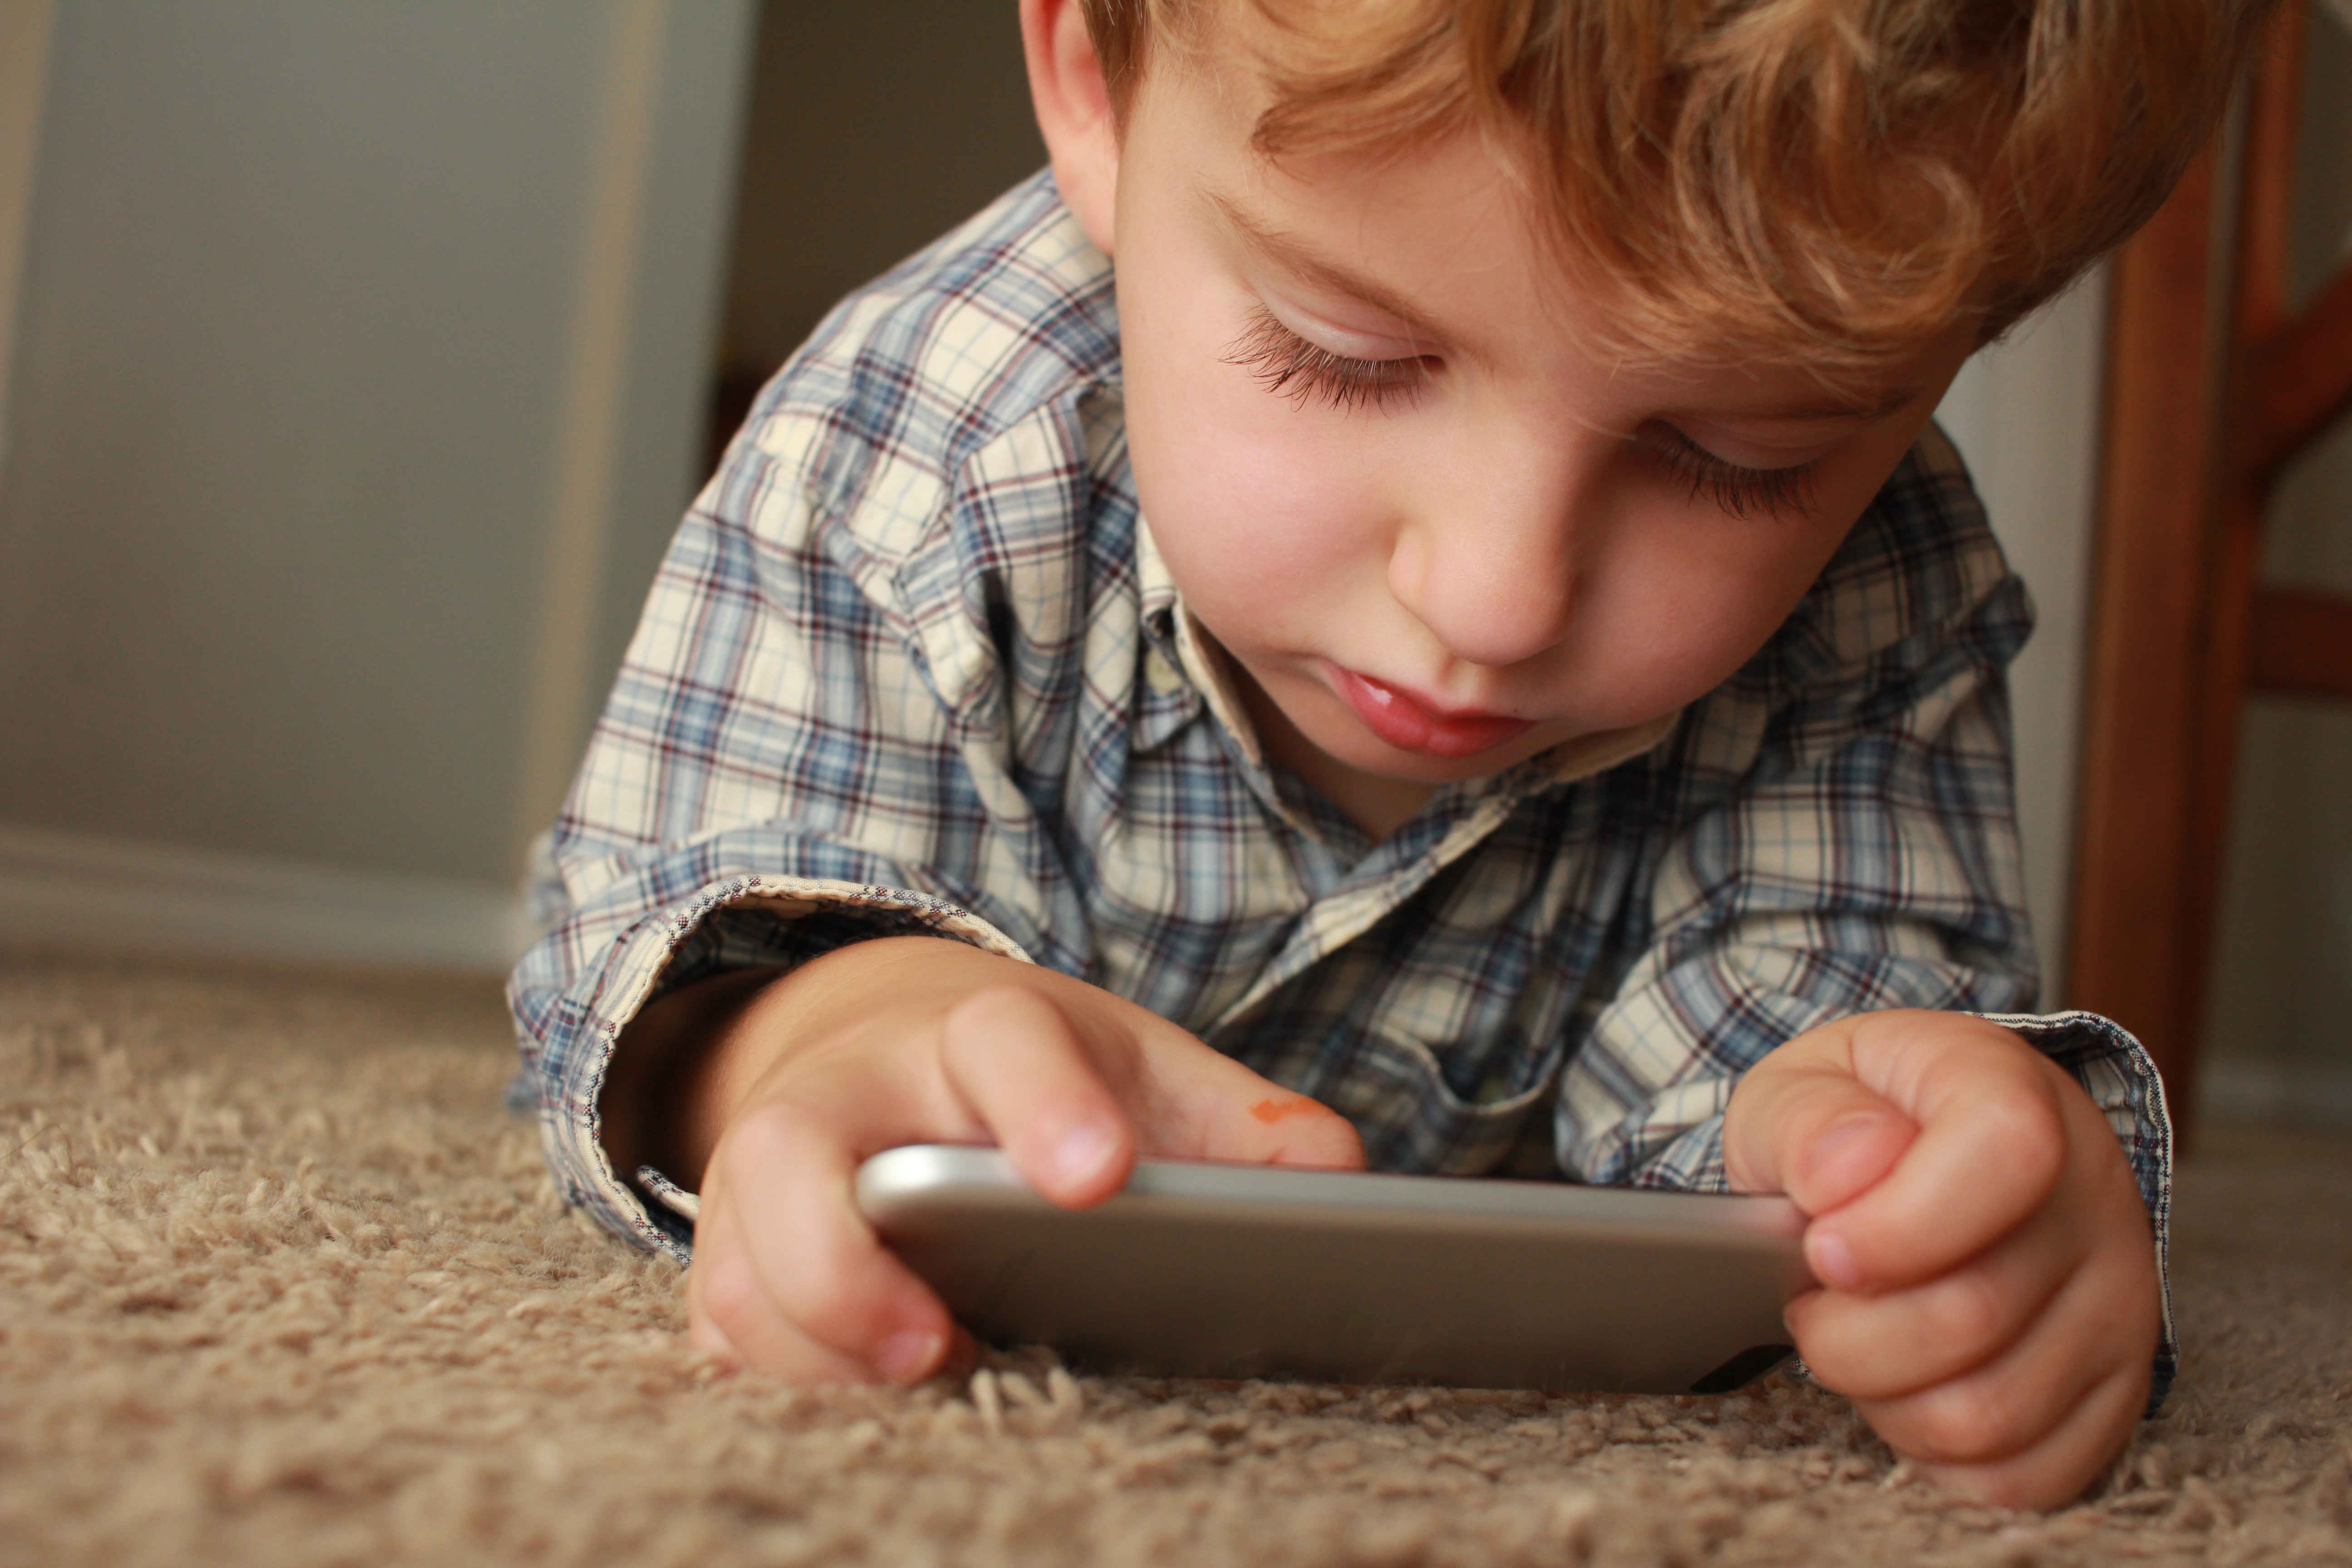 Young boy laid on the floor and playing with a mobile phone